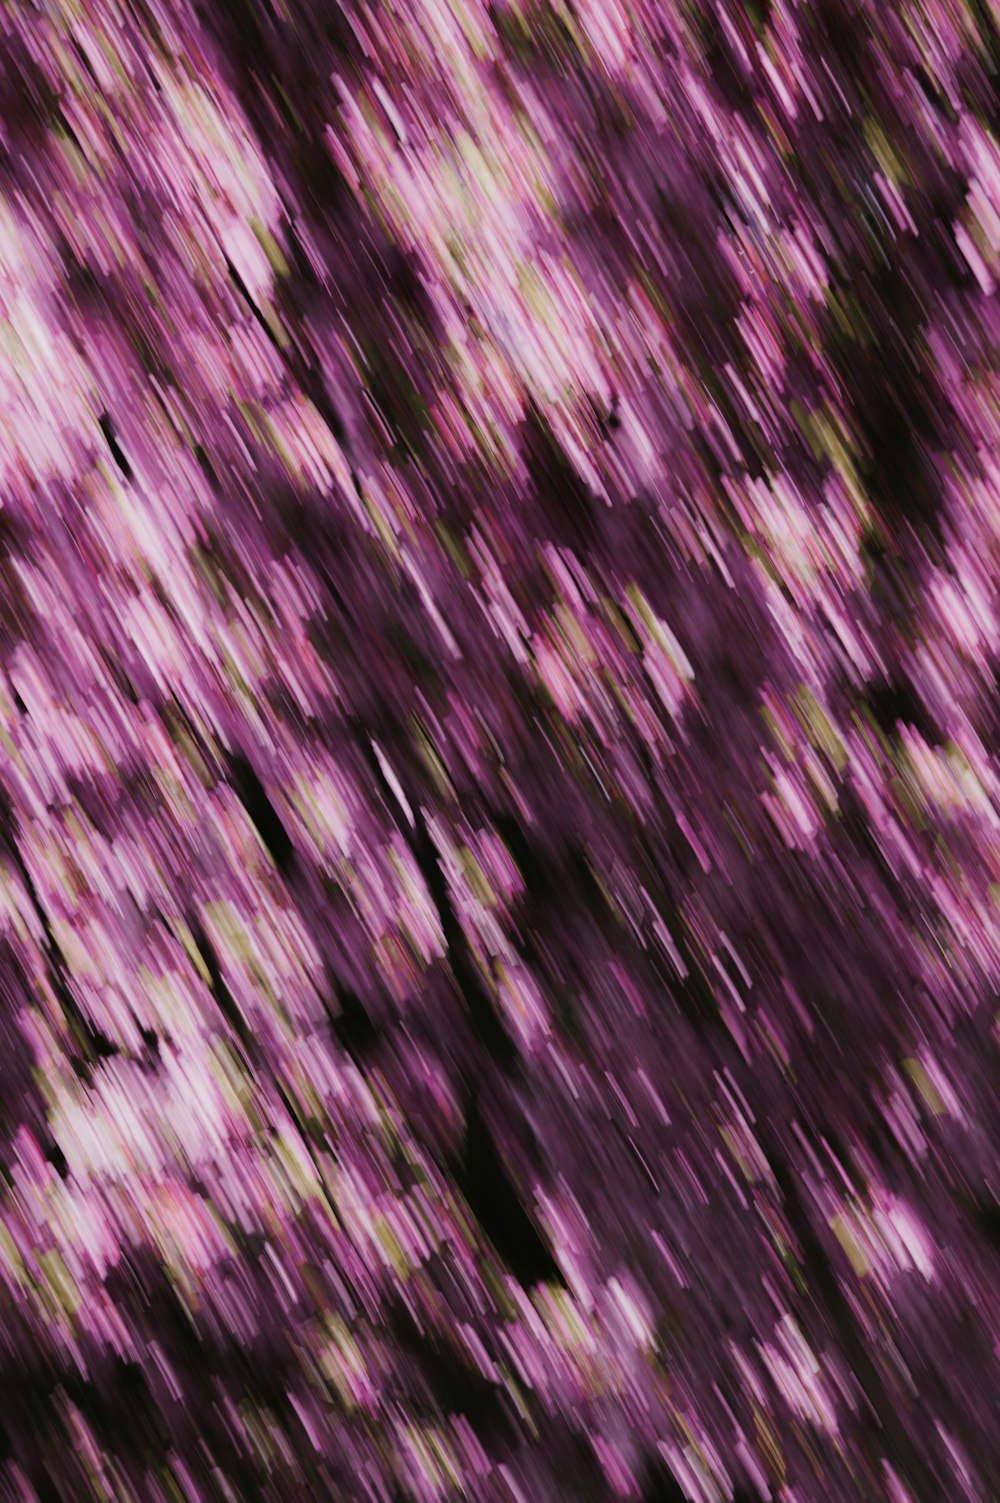 a blurry photo of a tree with purple flowers